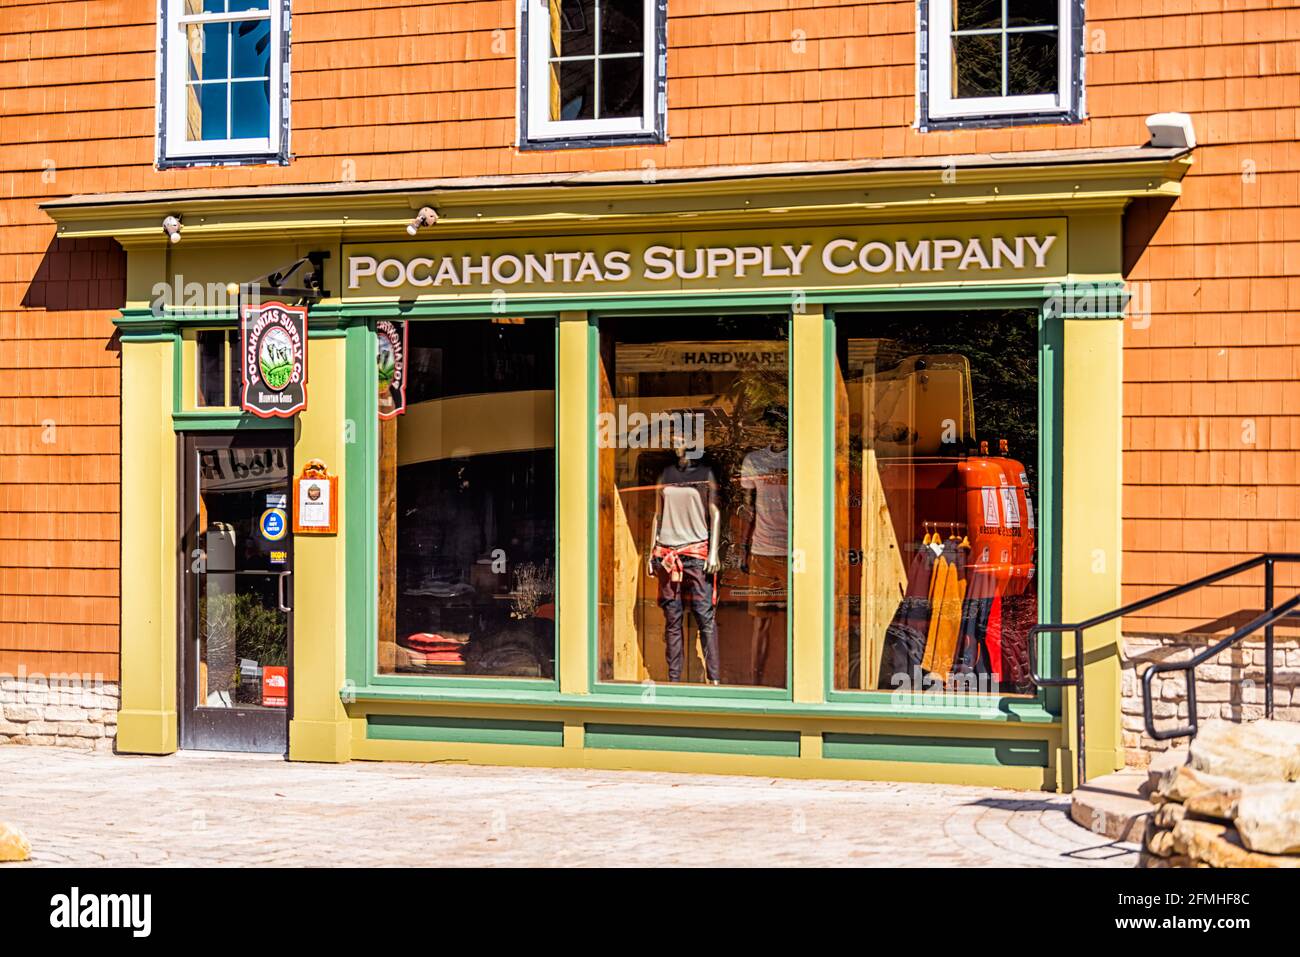 Snowshoe, USA - October 6, 2020: Pocahontas supply company retail store shop window selling clothes clothing gear, skiing outfit clothing in West Virg Stock Photo